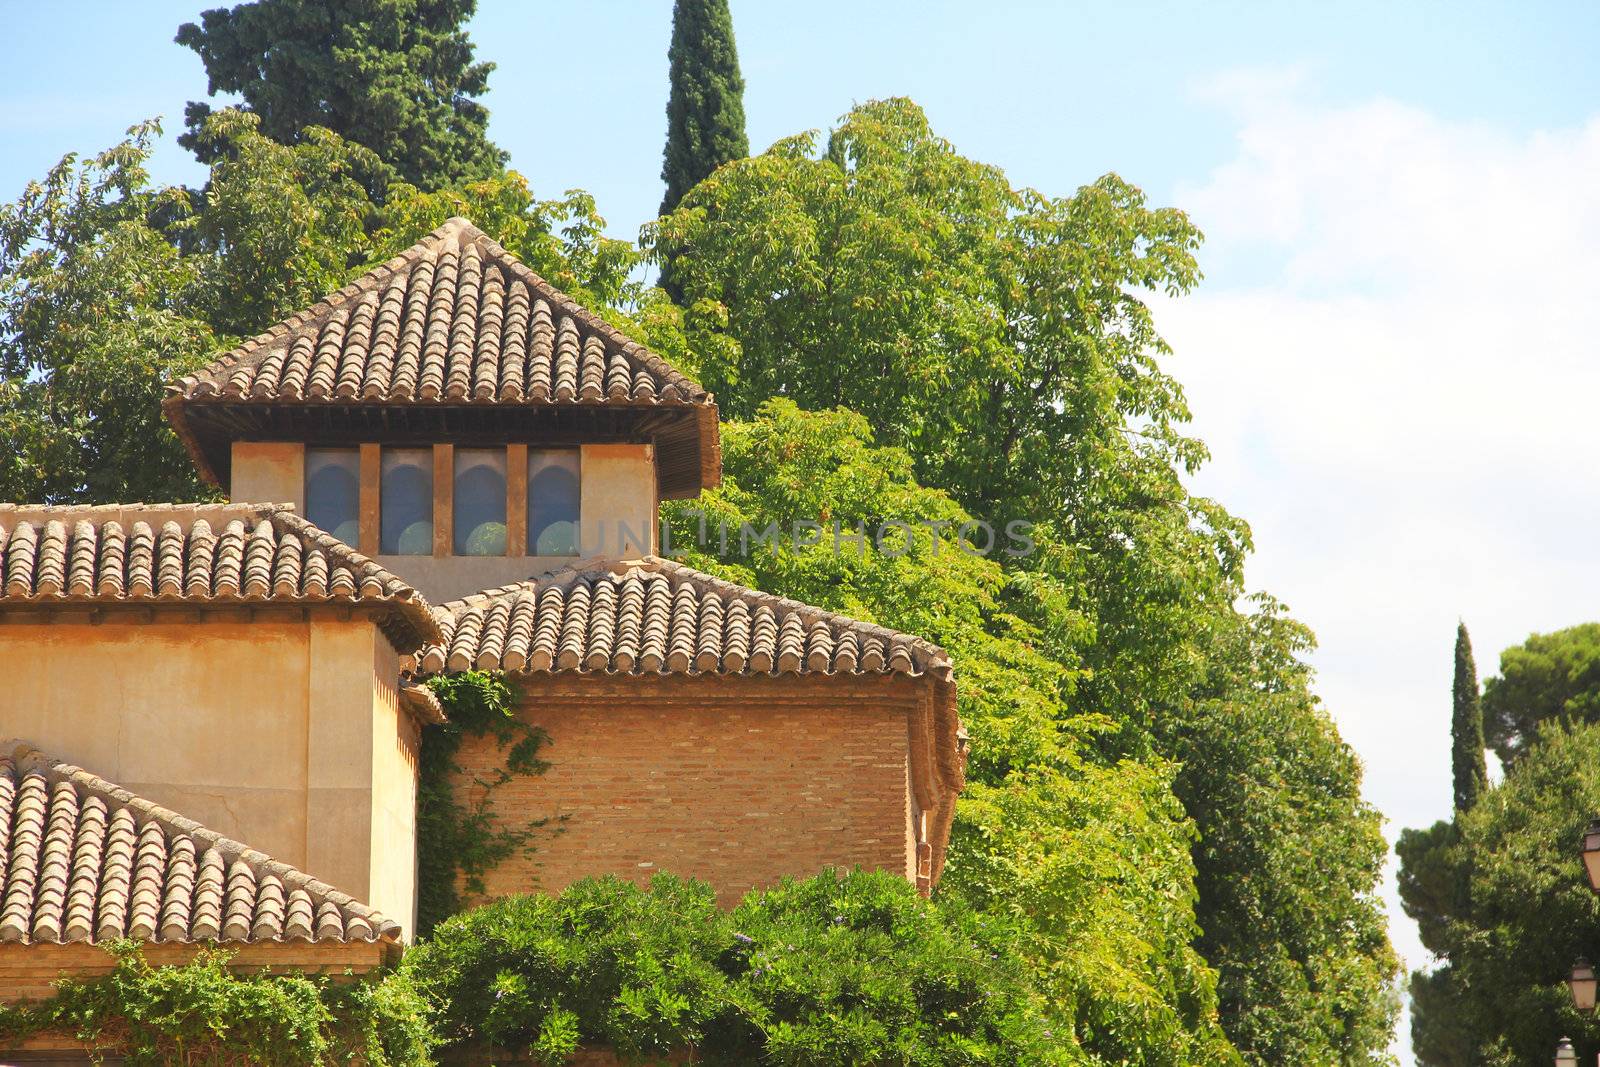 Beautiful view on ancient buildings and gardens of Alhambra